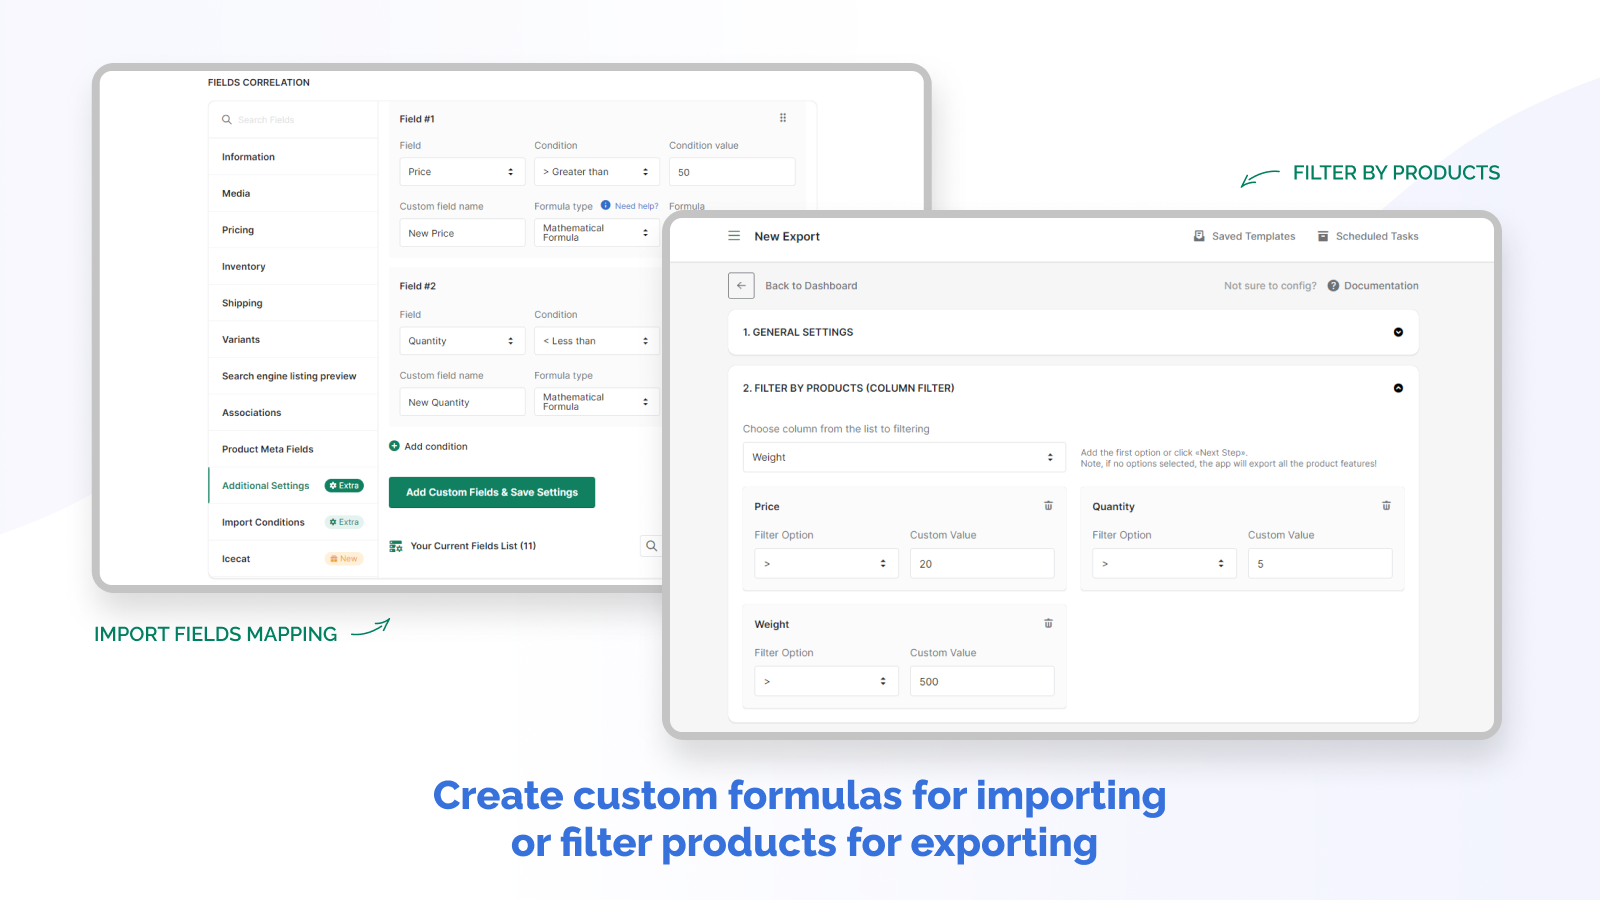 Use custom formulas for importing or filter products for export